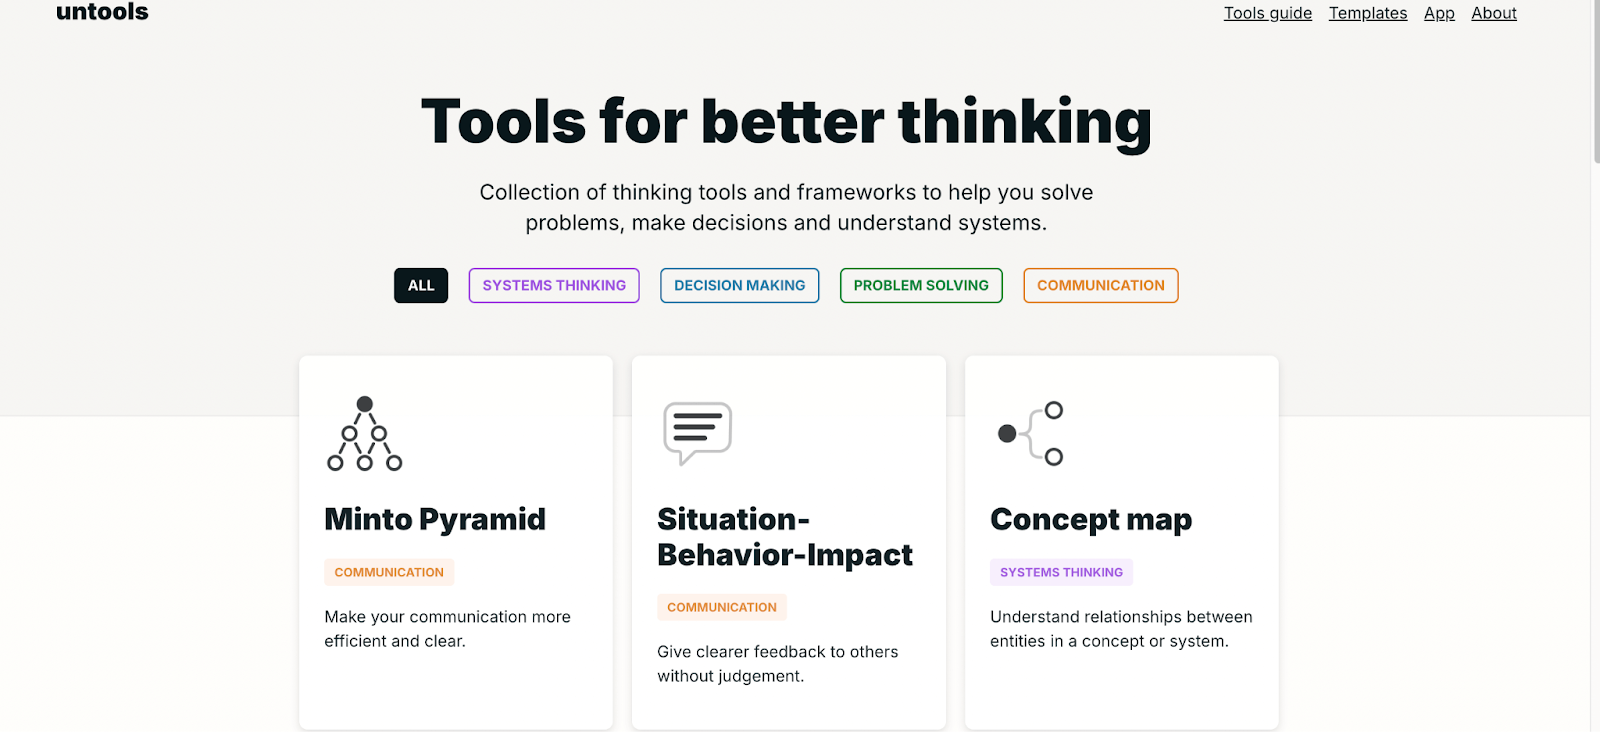 Untools is one of the best tools that will help you take efficient product related decisions